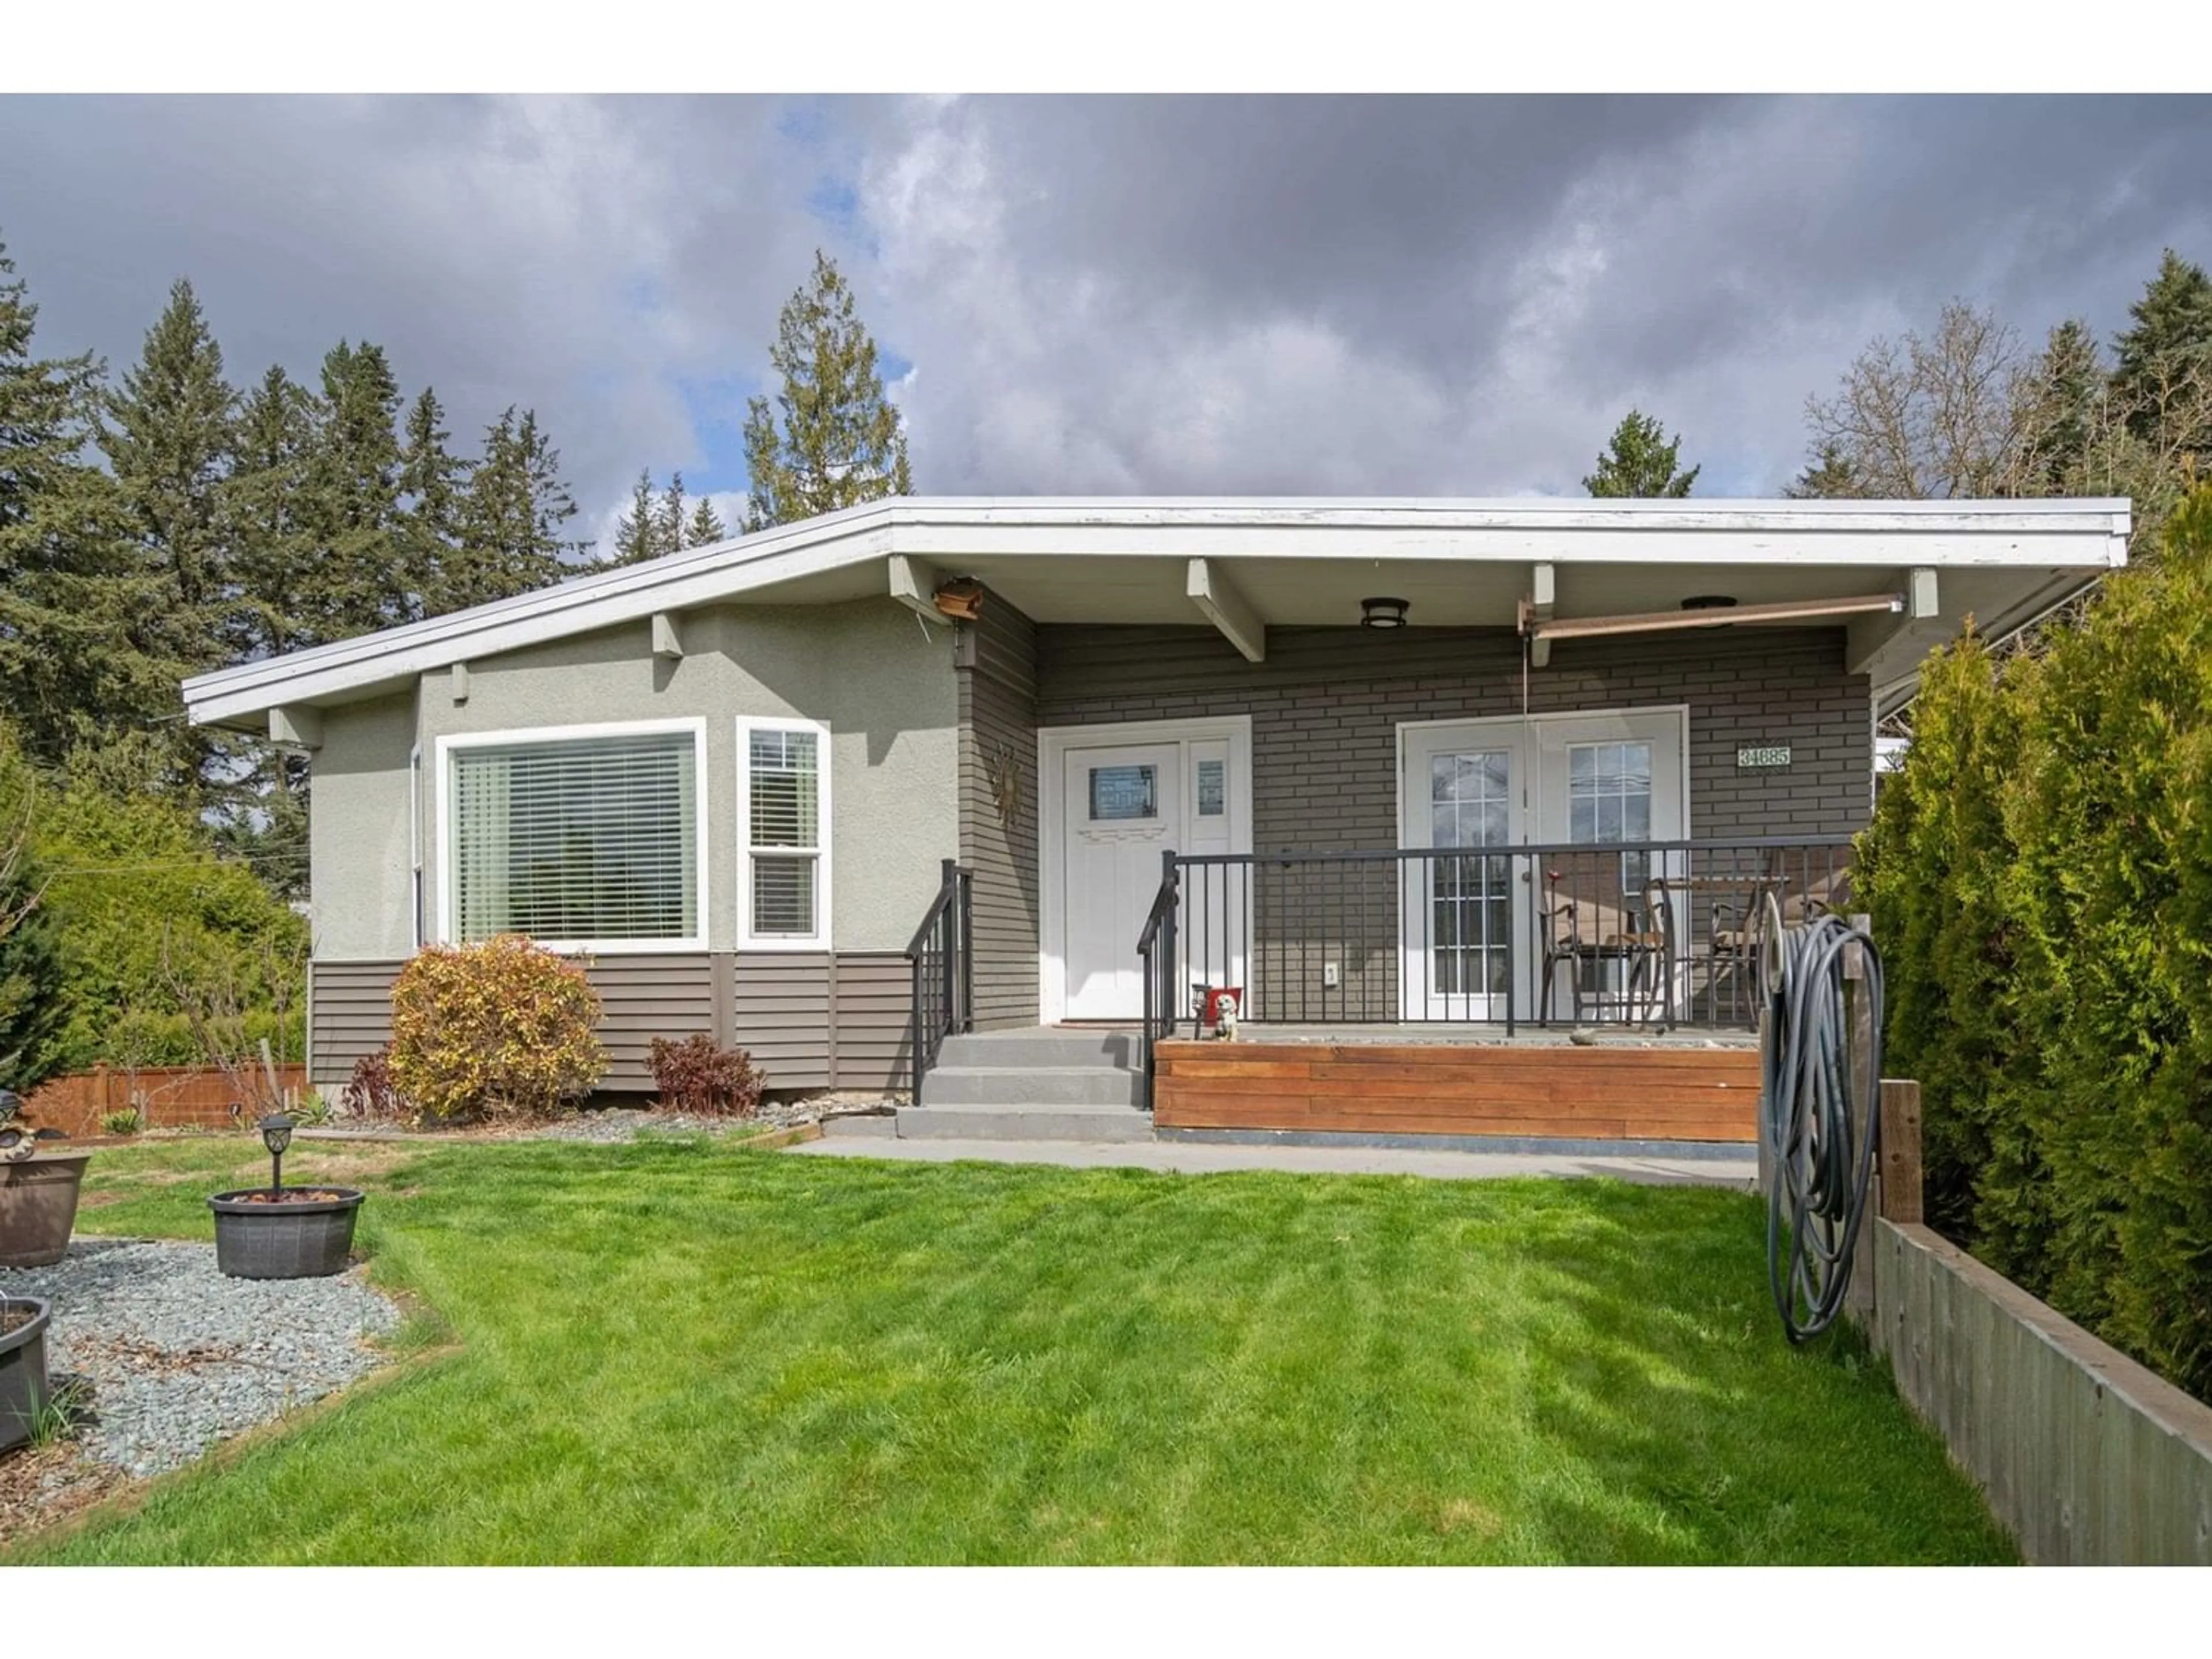 Home with vinyl exterior material for 34685 OLD CLAYBURN ROAD, Abbotsford British Columbia V2S4H6